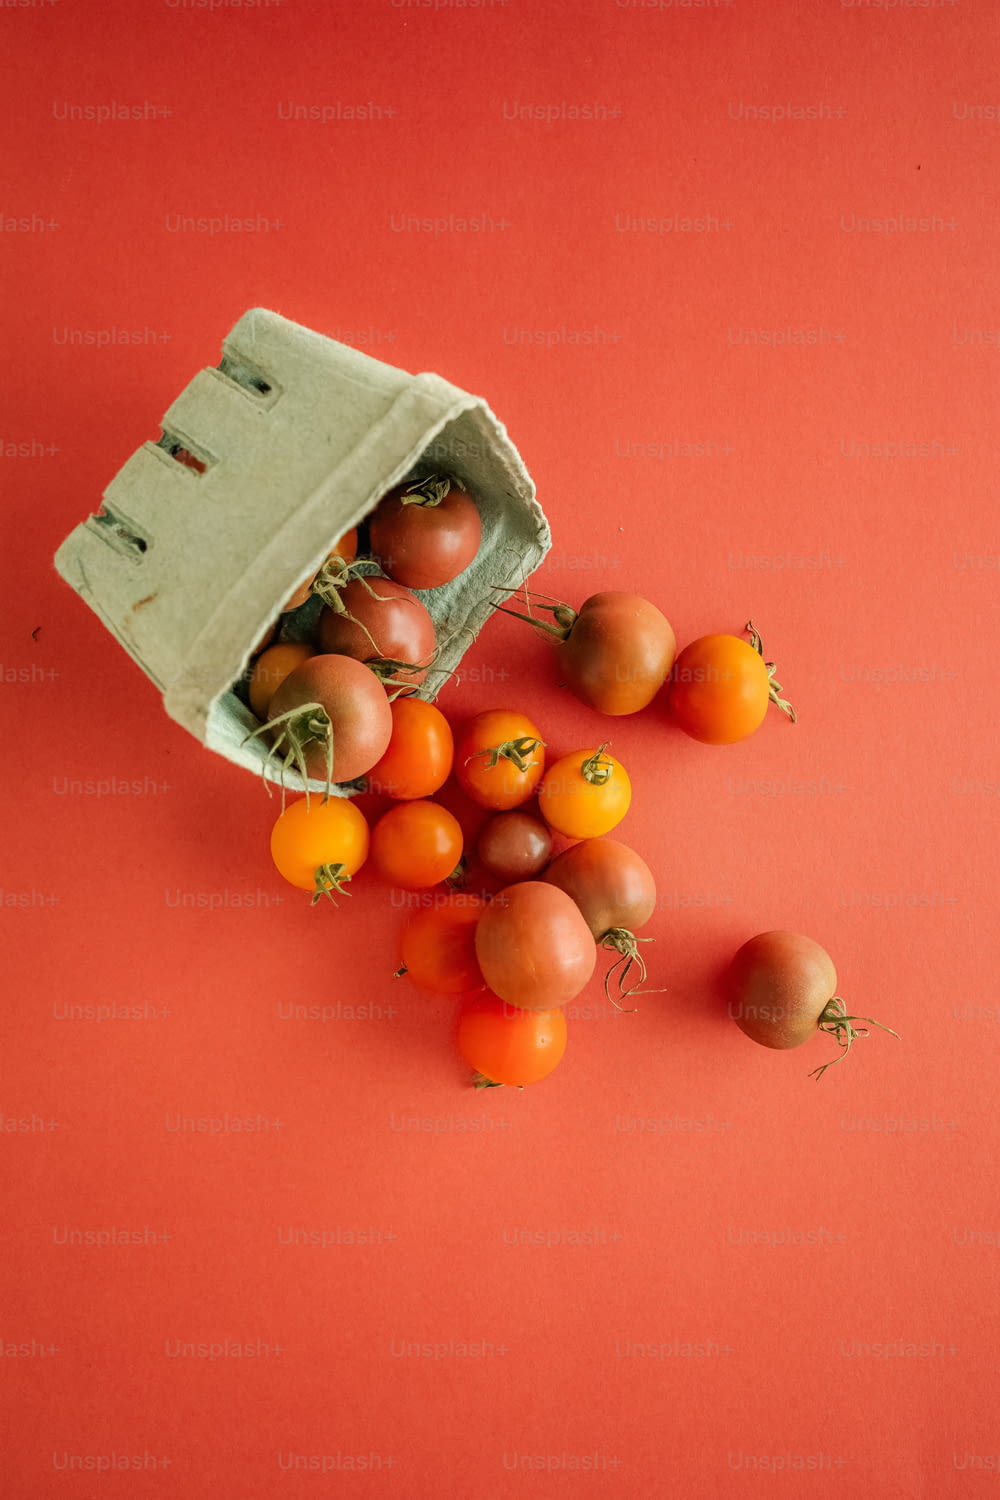 a bag of tomatoes on a red surface